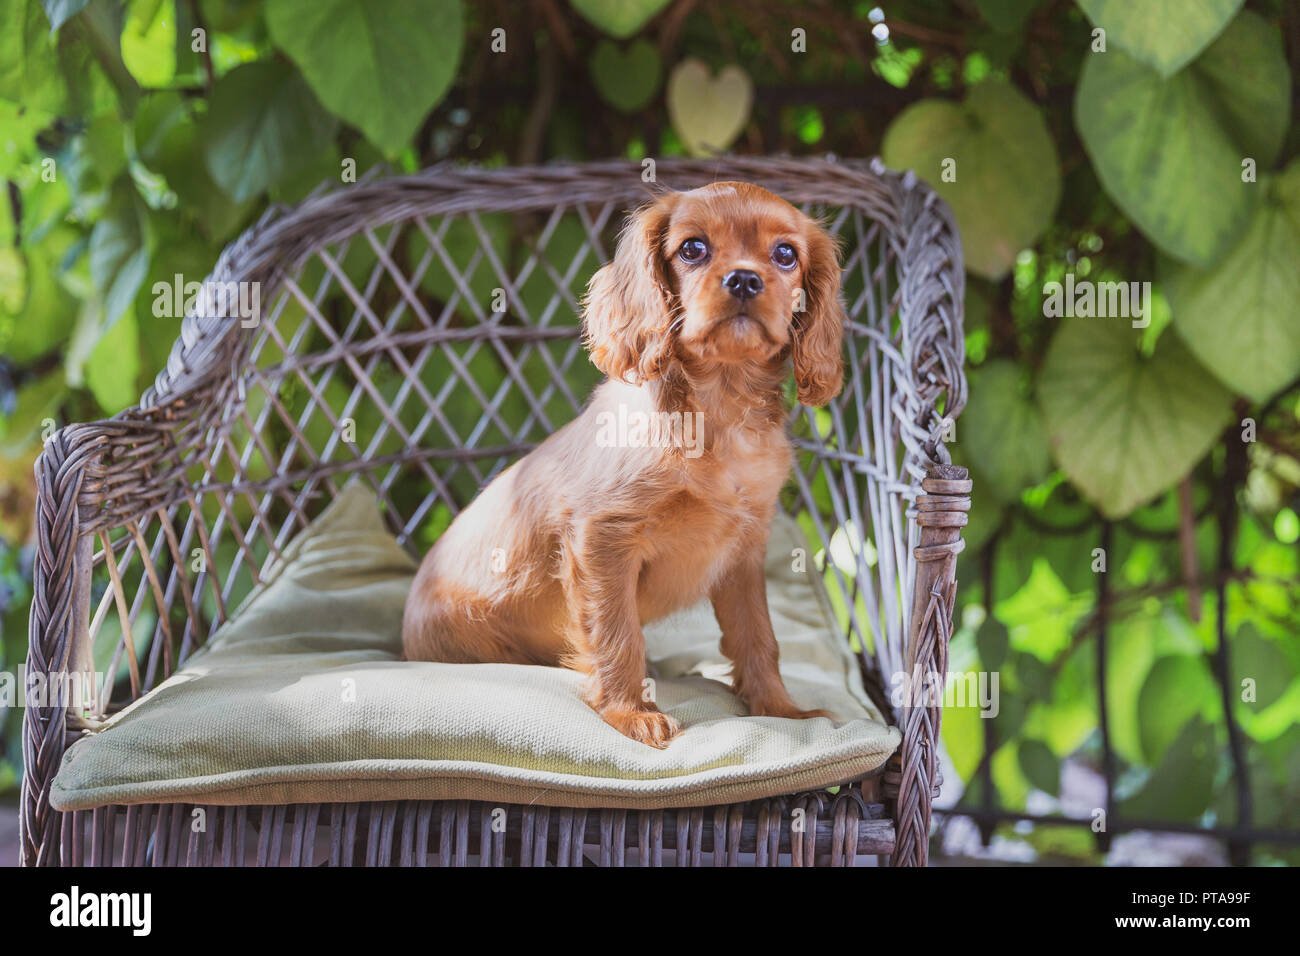 Cute puppy sitting on the chair in the garden Stock Photo